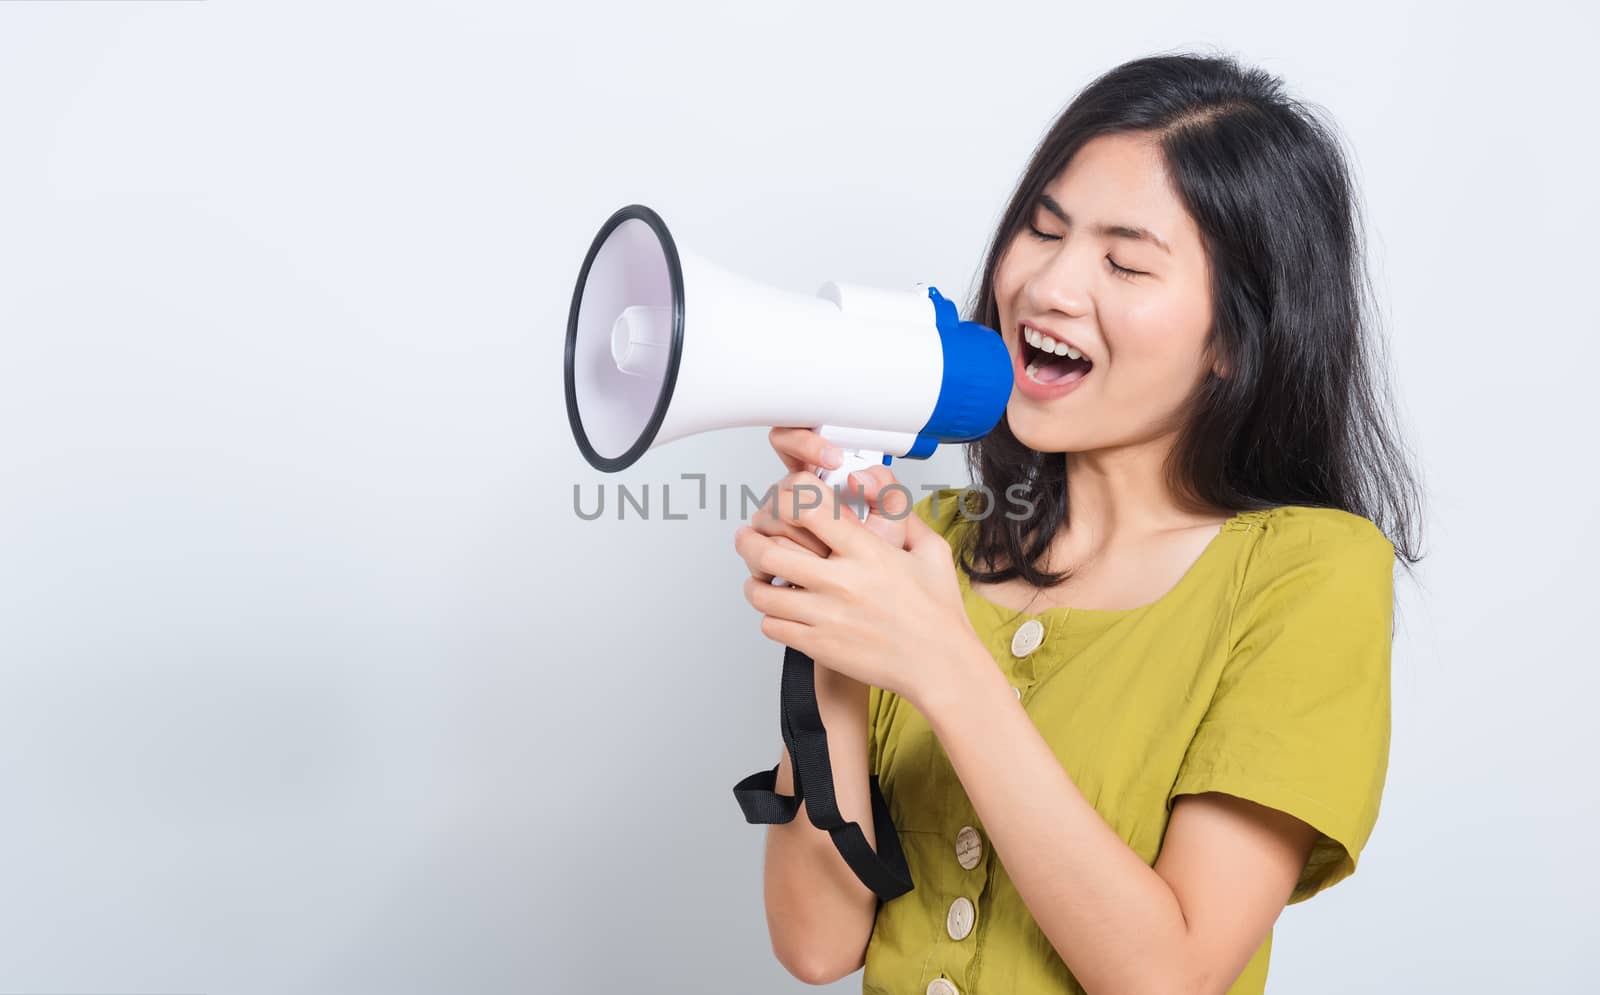 Portrait Asian beautiful young woman standing smile holding and shouting into megaphone looking to space, shoot the photo in a studio on a white background, There was copy space